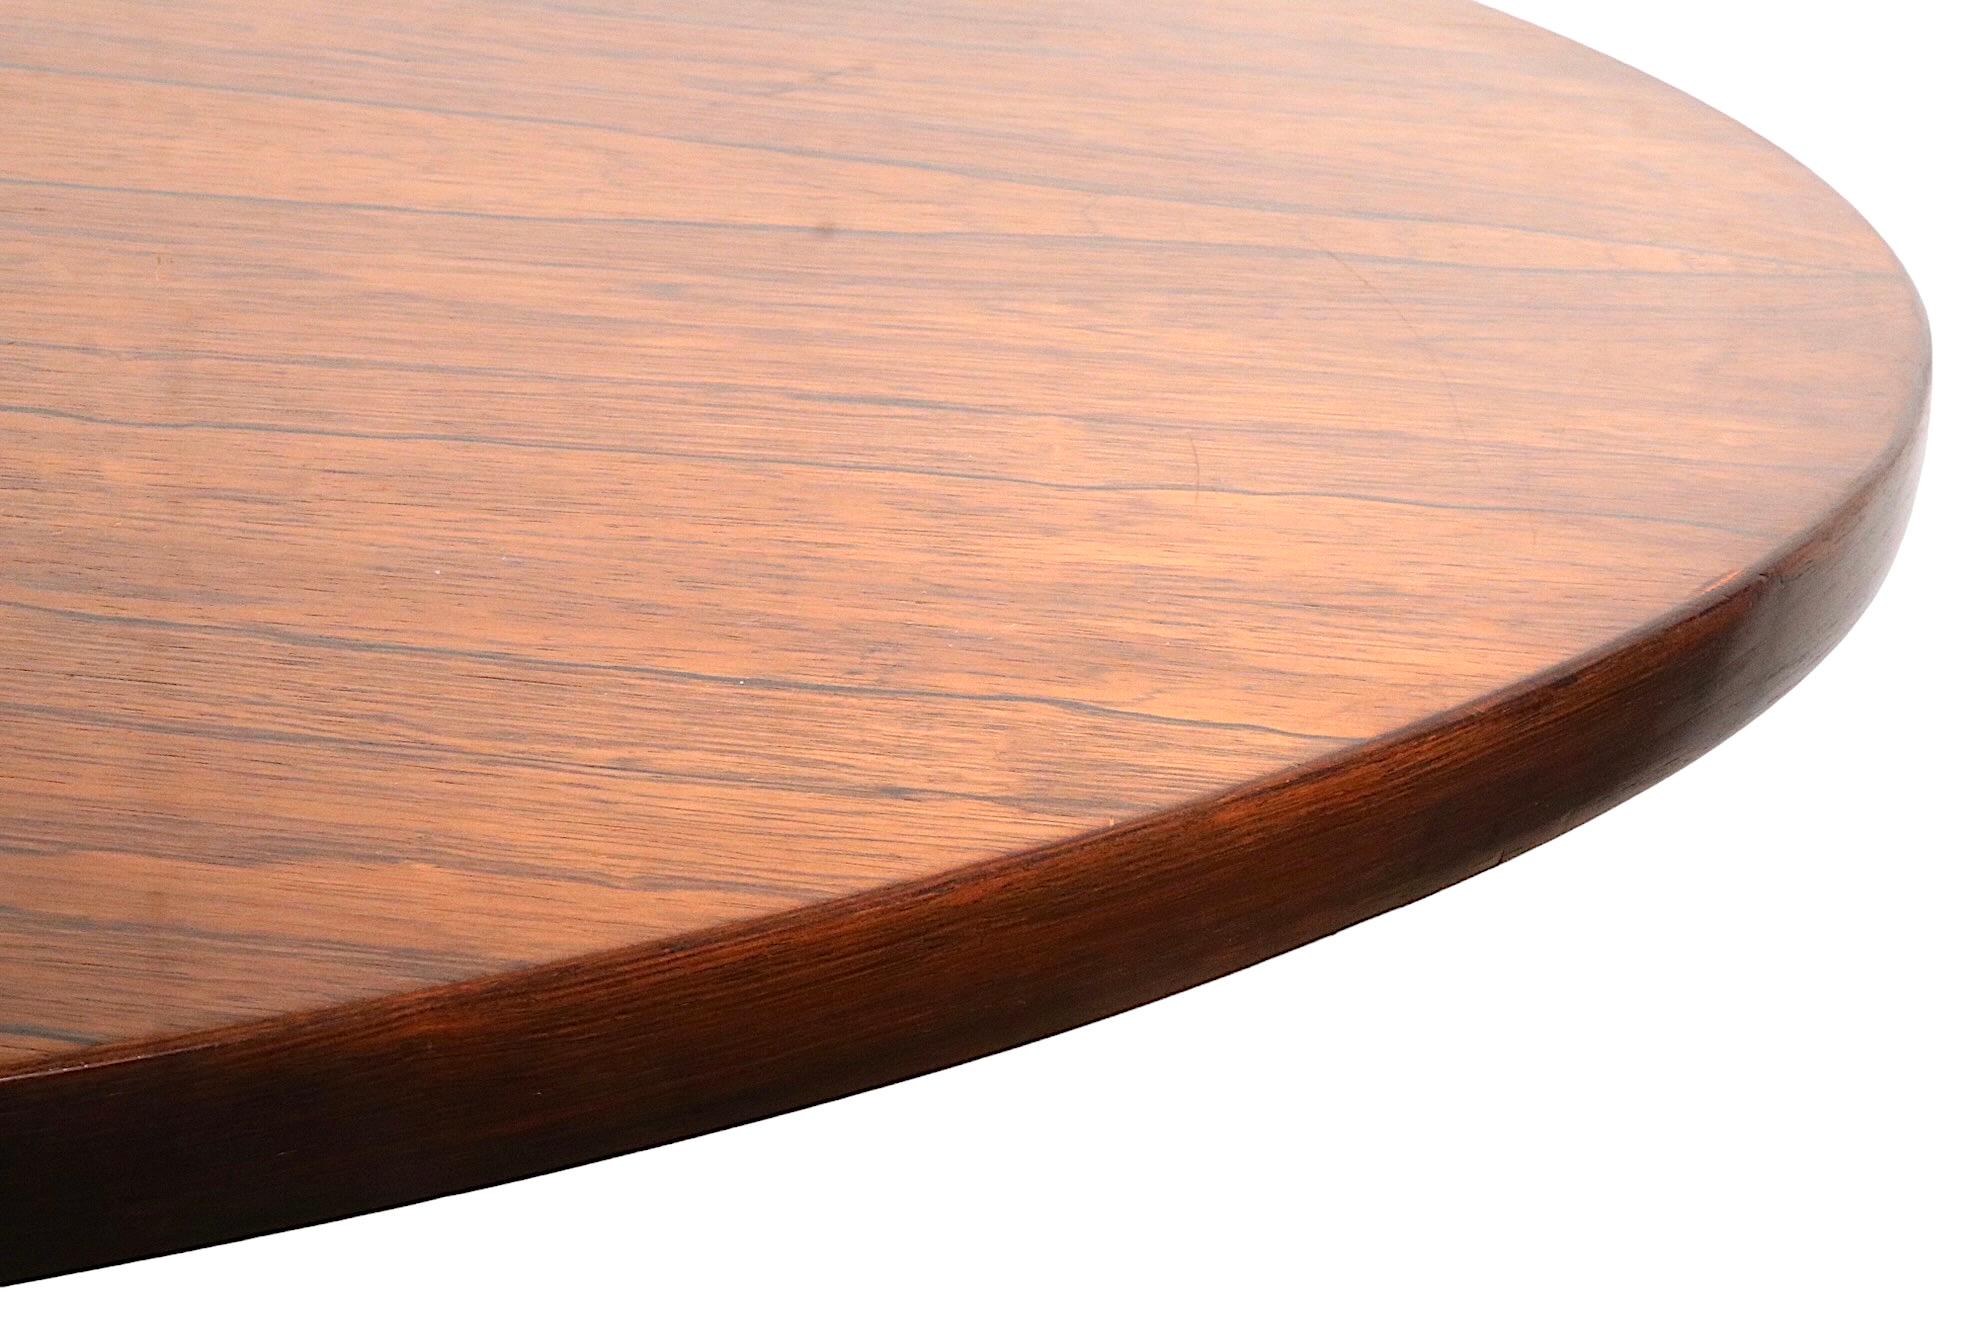 Dunbar Wormley Dining Table in Rosewood Model 936 C 1950/1960's For Sale 4